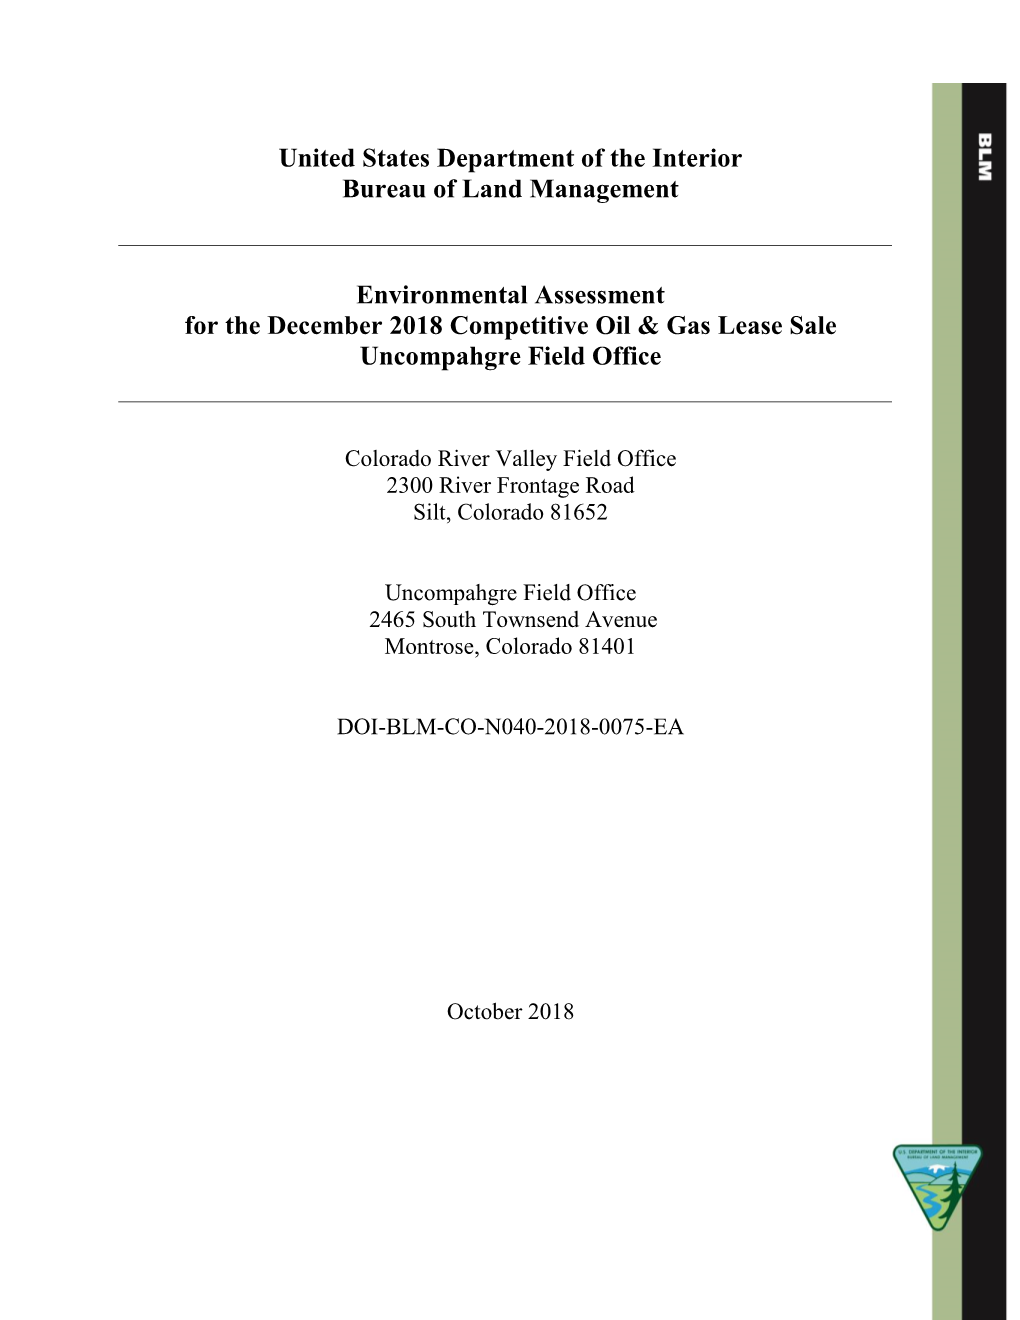 United States Department of the Interior Bureau of Land Management Environmental Assessment for the December 2018 Competitive Oi